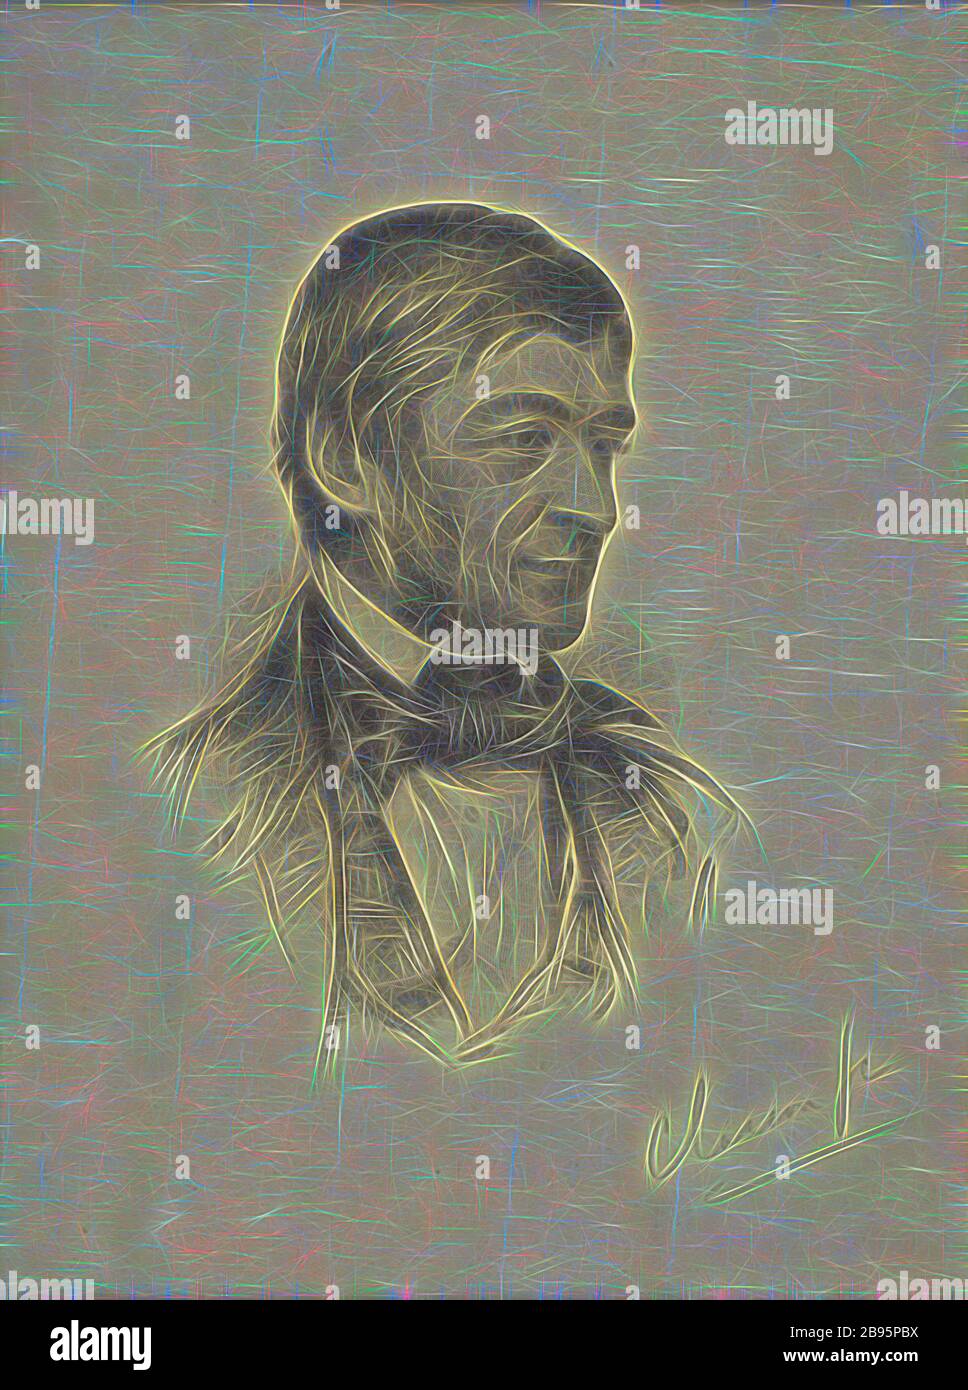 Portrait of Ralph Waldo Emerson, William Baxter Palmer Closson (American), After Samuel Rawse, 19th century, wood engraving, 6 x 4-1/8 in. (image) 14 x 11-1/4 in. (sheet), Reimagined by Gibon, design of warm cheerful glowing of brightness and light rays radiance. Classic art reinvented with a modern twist. Photography inspired by futurism, embracing dynamic energy of modern technology, movement, speed and revolutionize culture. Stock Photo